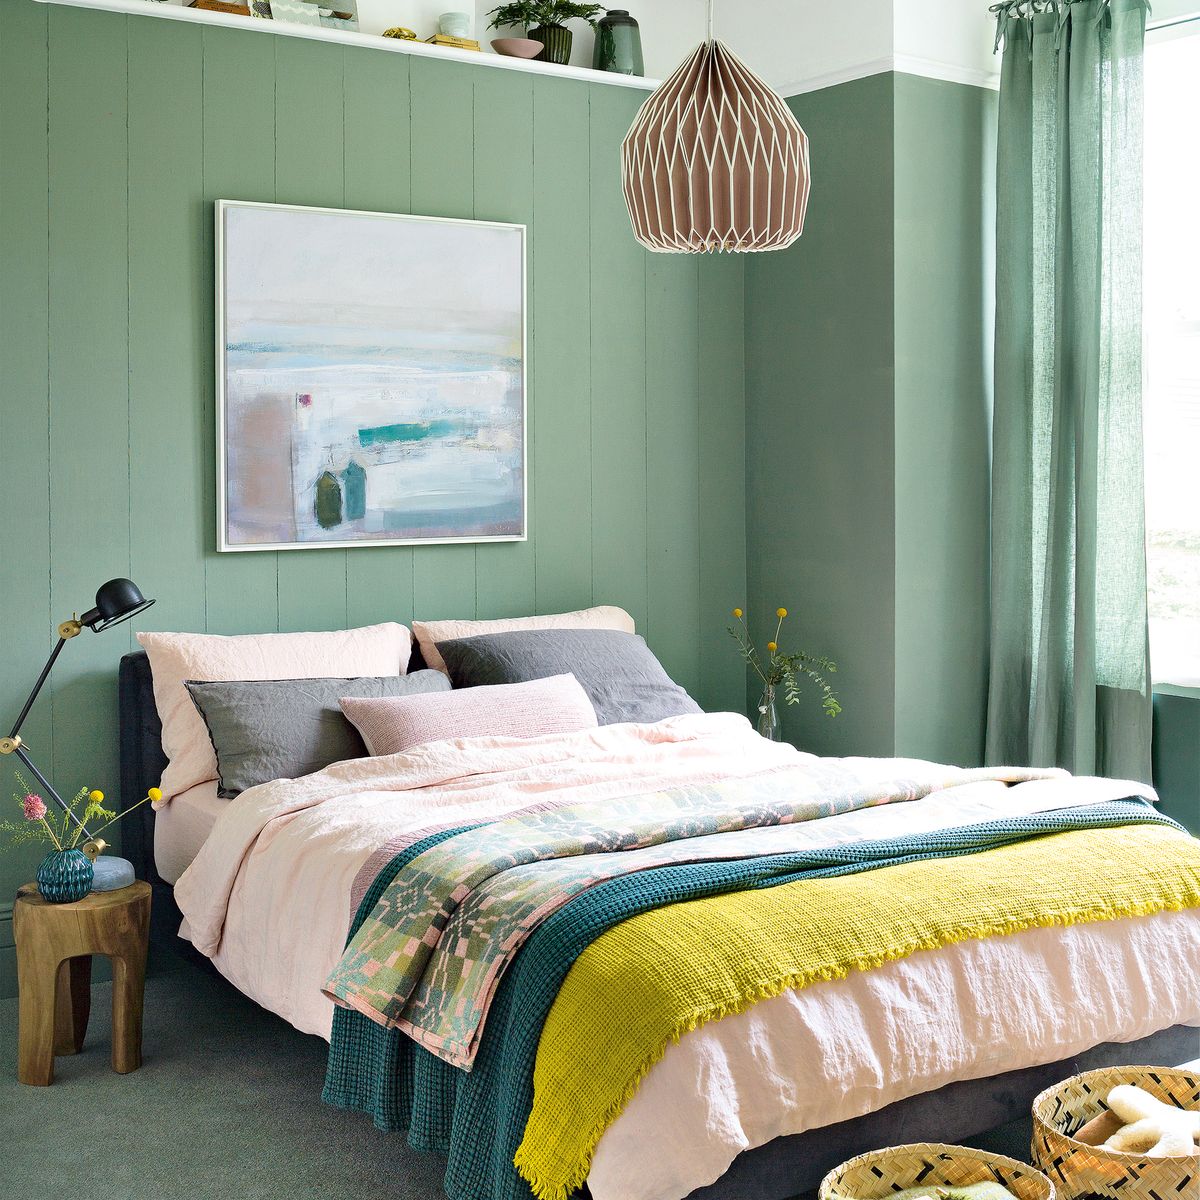 5 things to remove from your bedroom, according to experts | Ideal Home